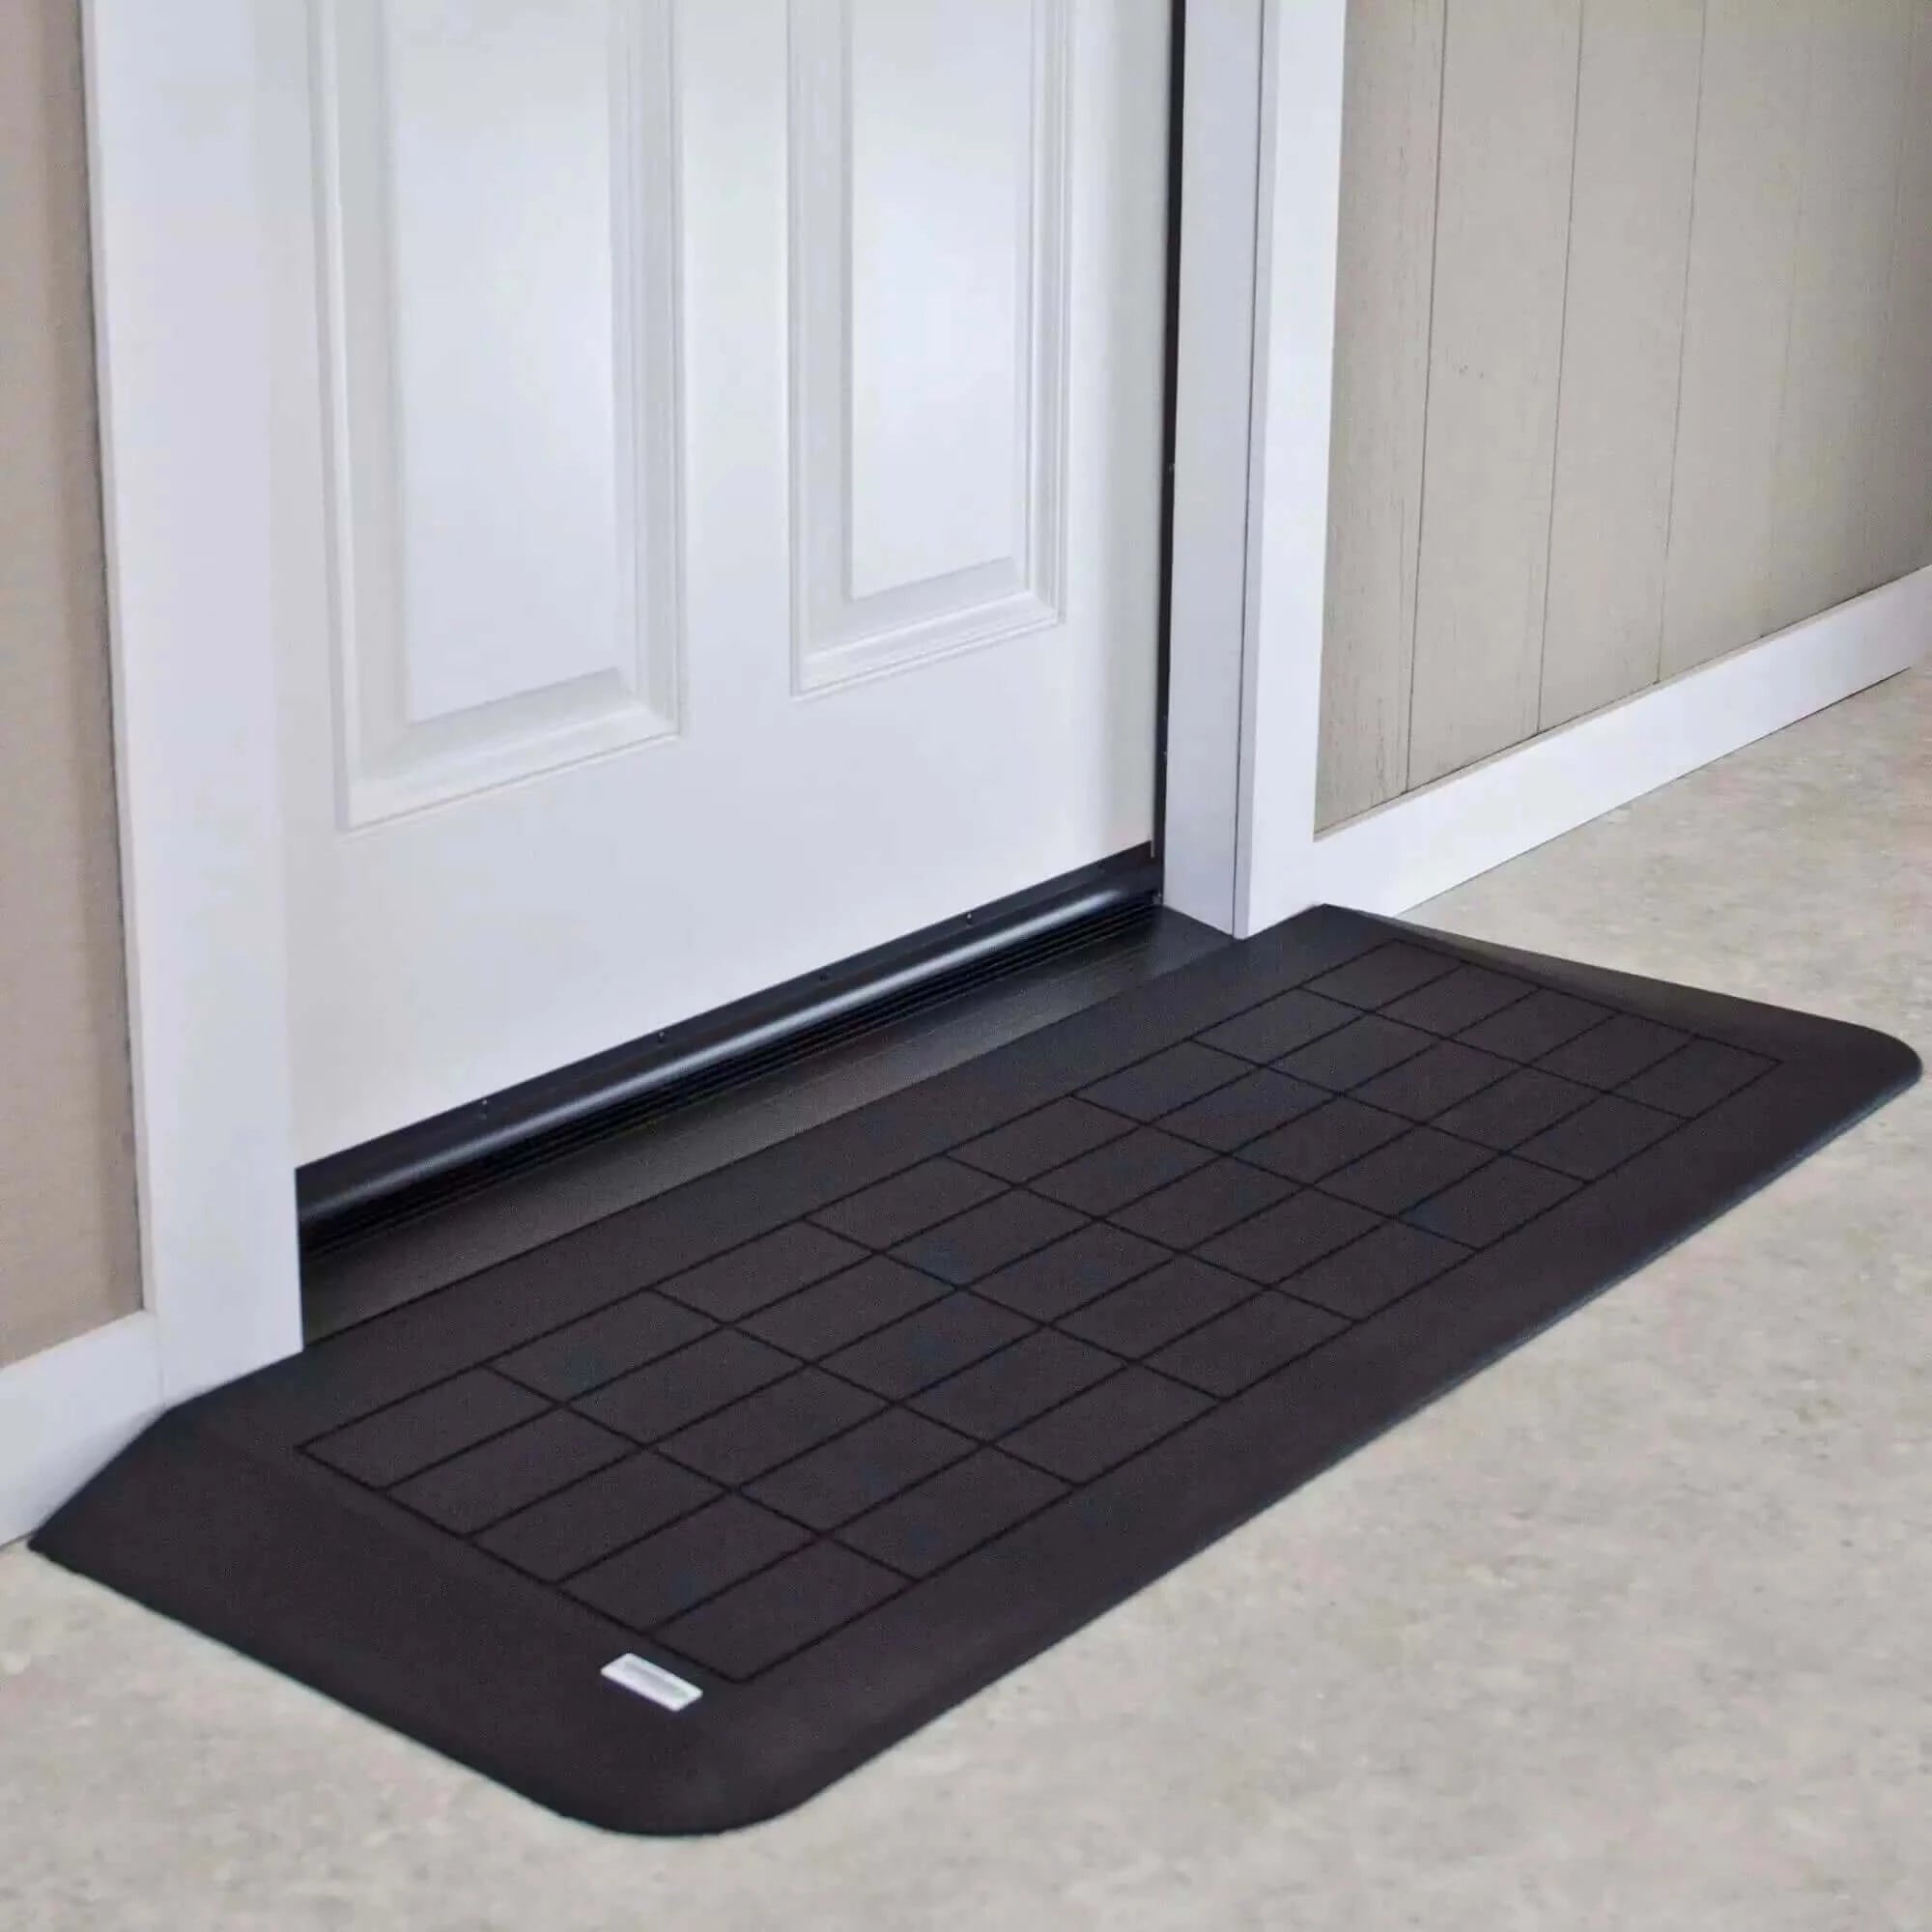 rubber ramp in front of a white doorway